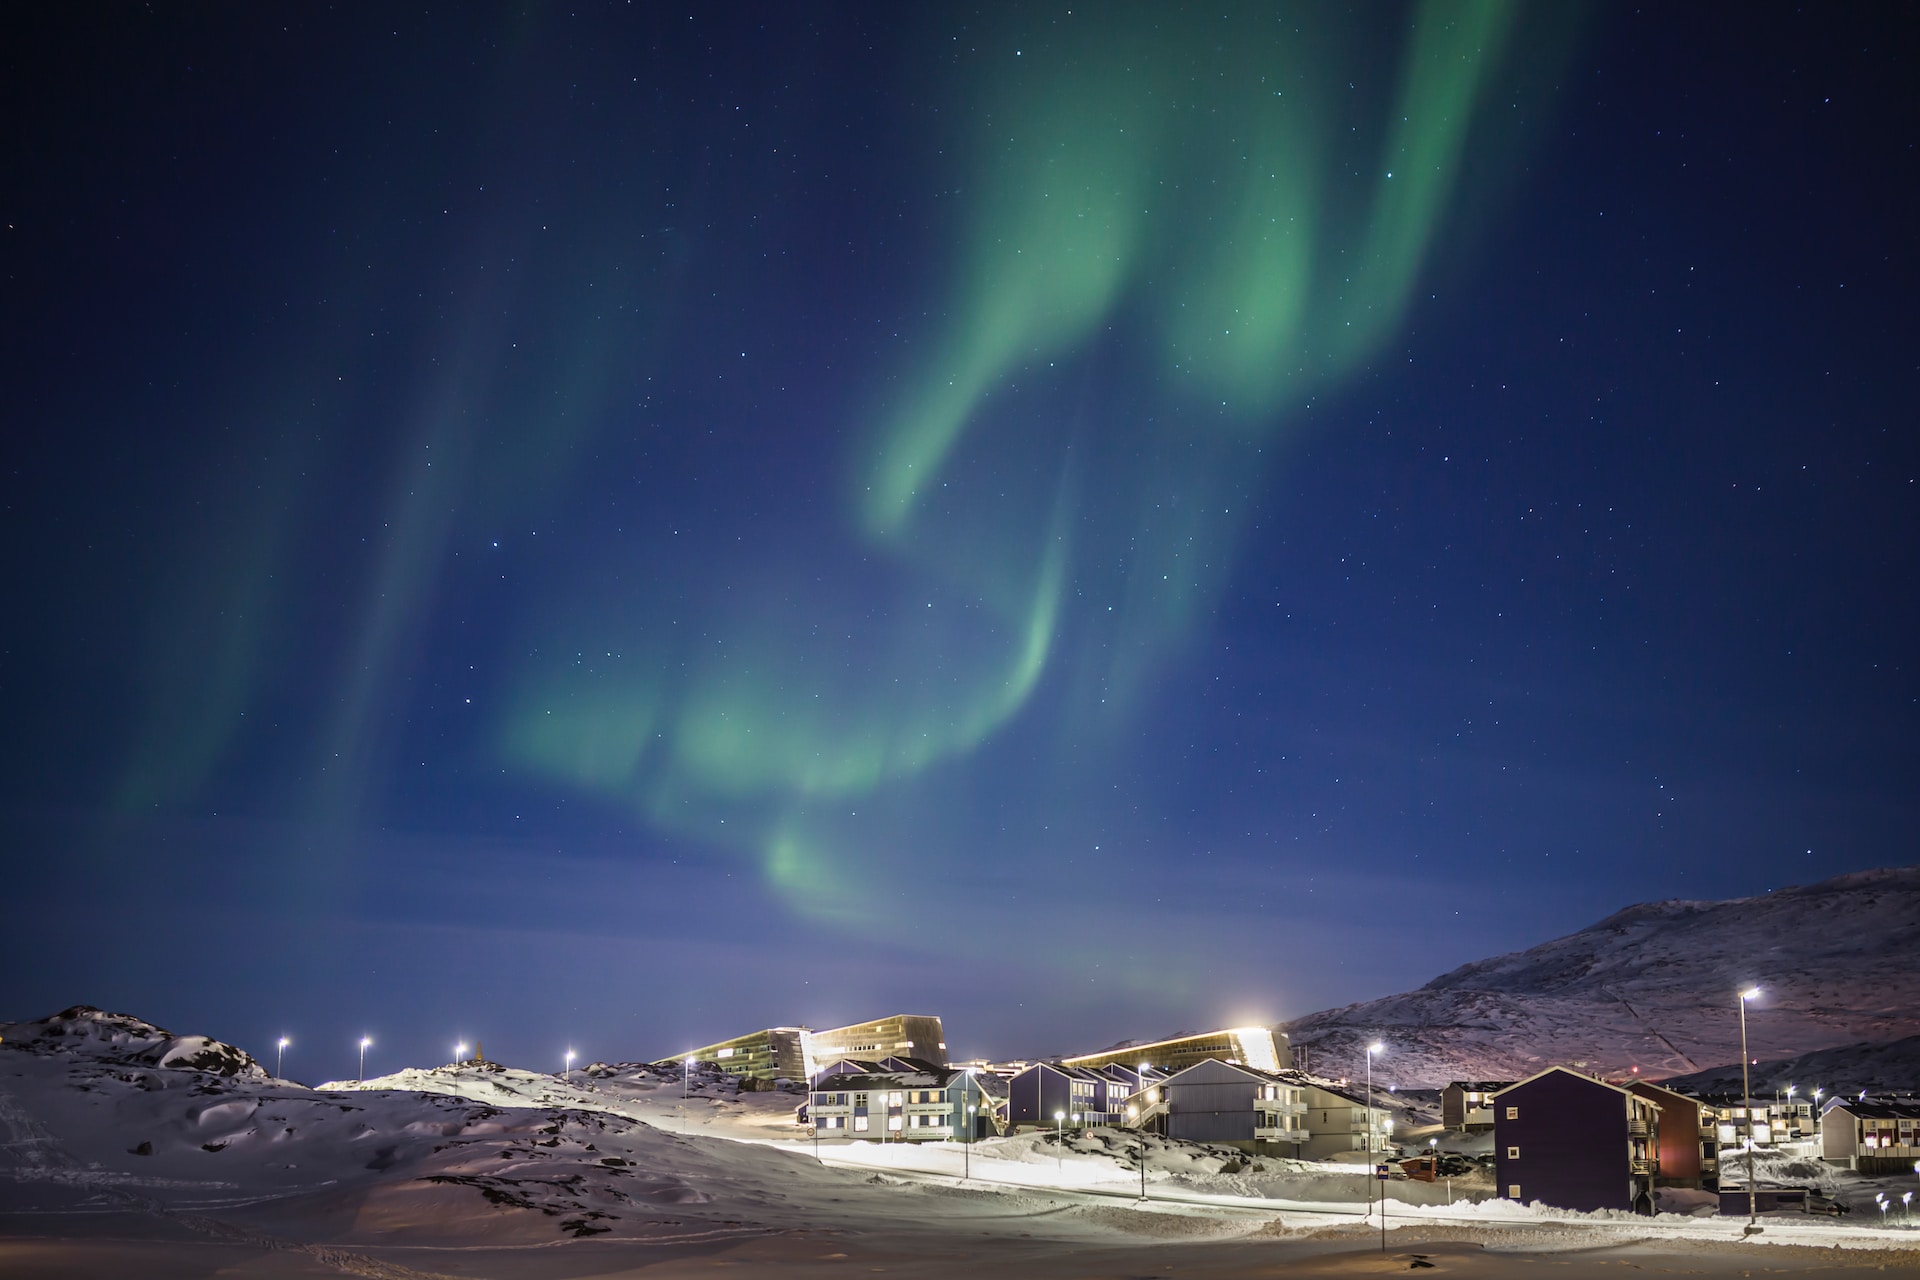 The Northern Lights in Greenland are a sight to behold.